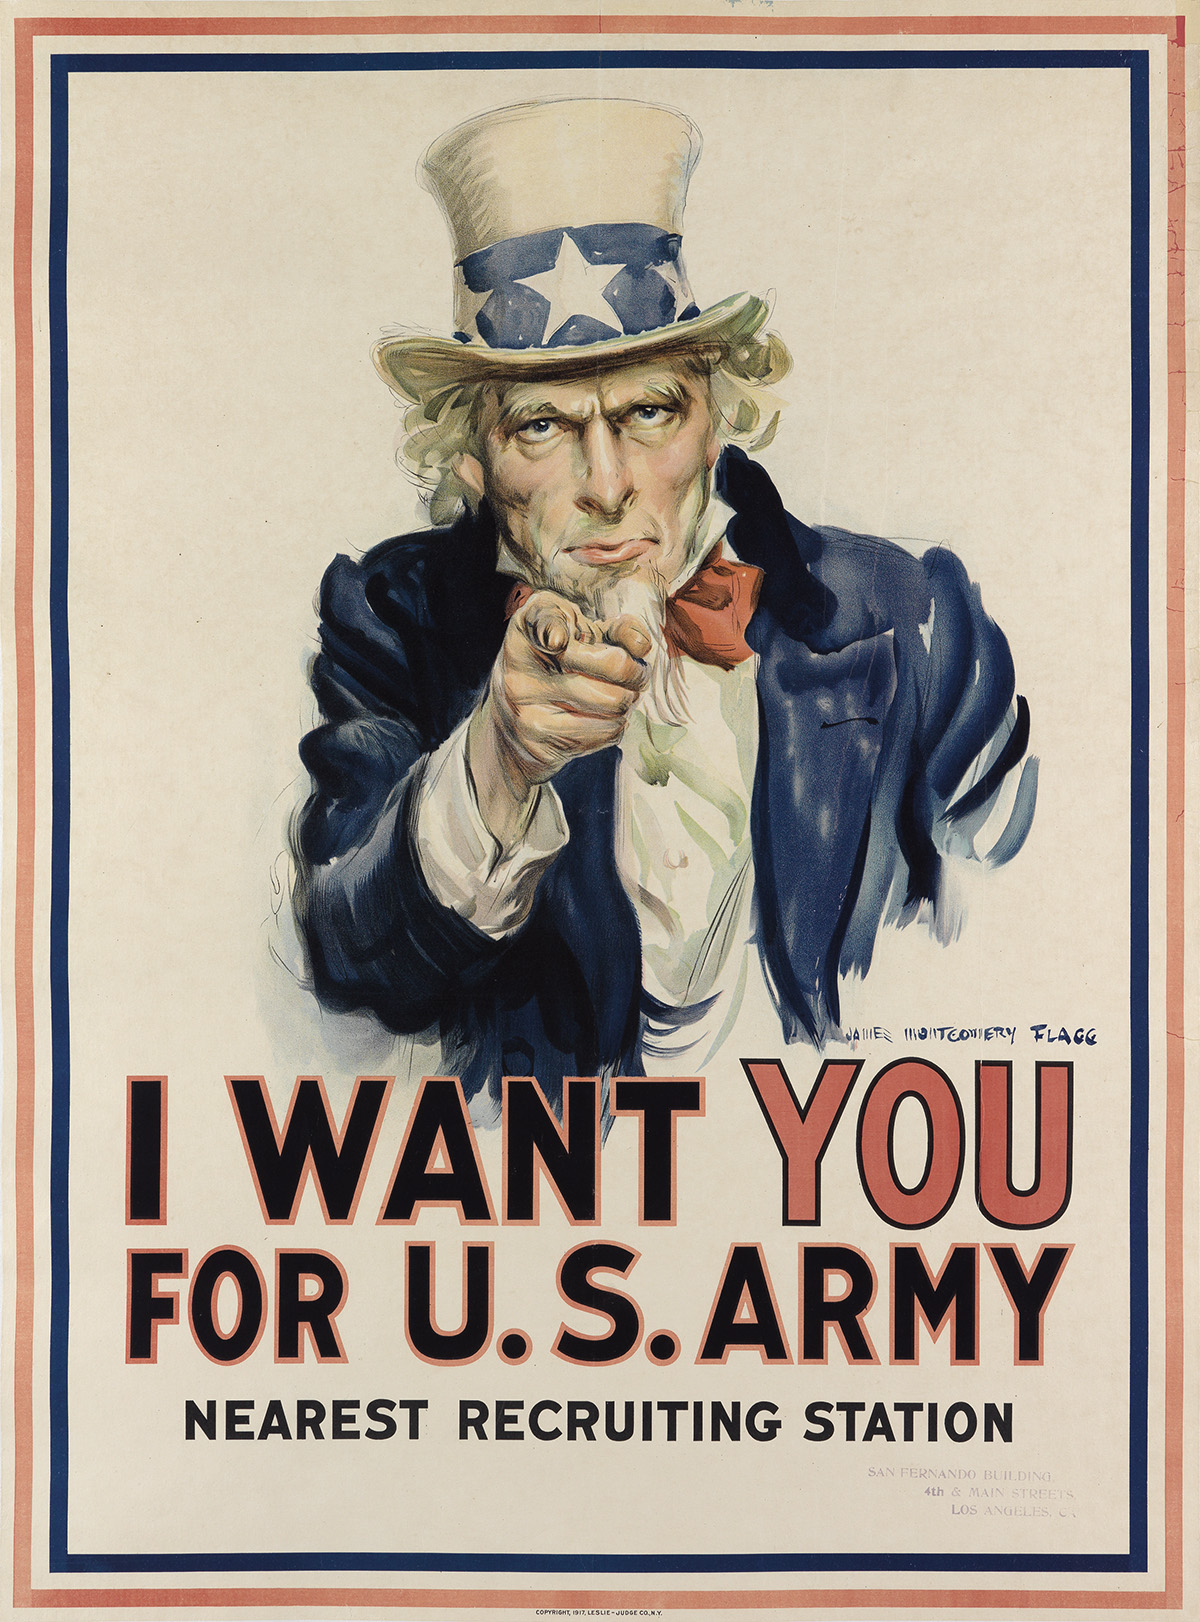 JAMES MONTGOMERY FLAGG (1870-1960). I WANT YOU FOR U.S. ARMY. 1917. 40x29 inches, 102x75 cm.